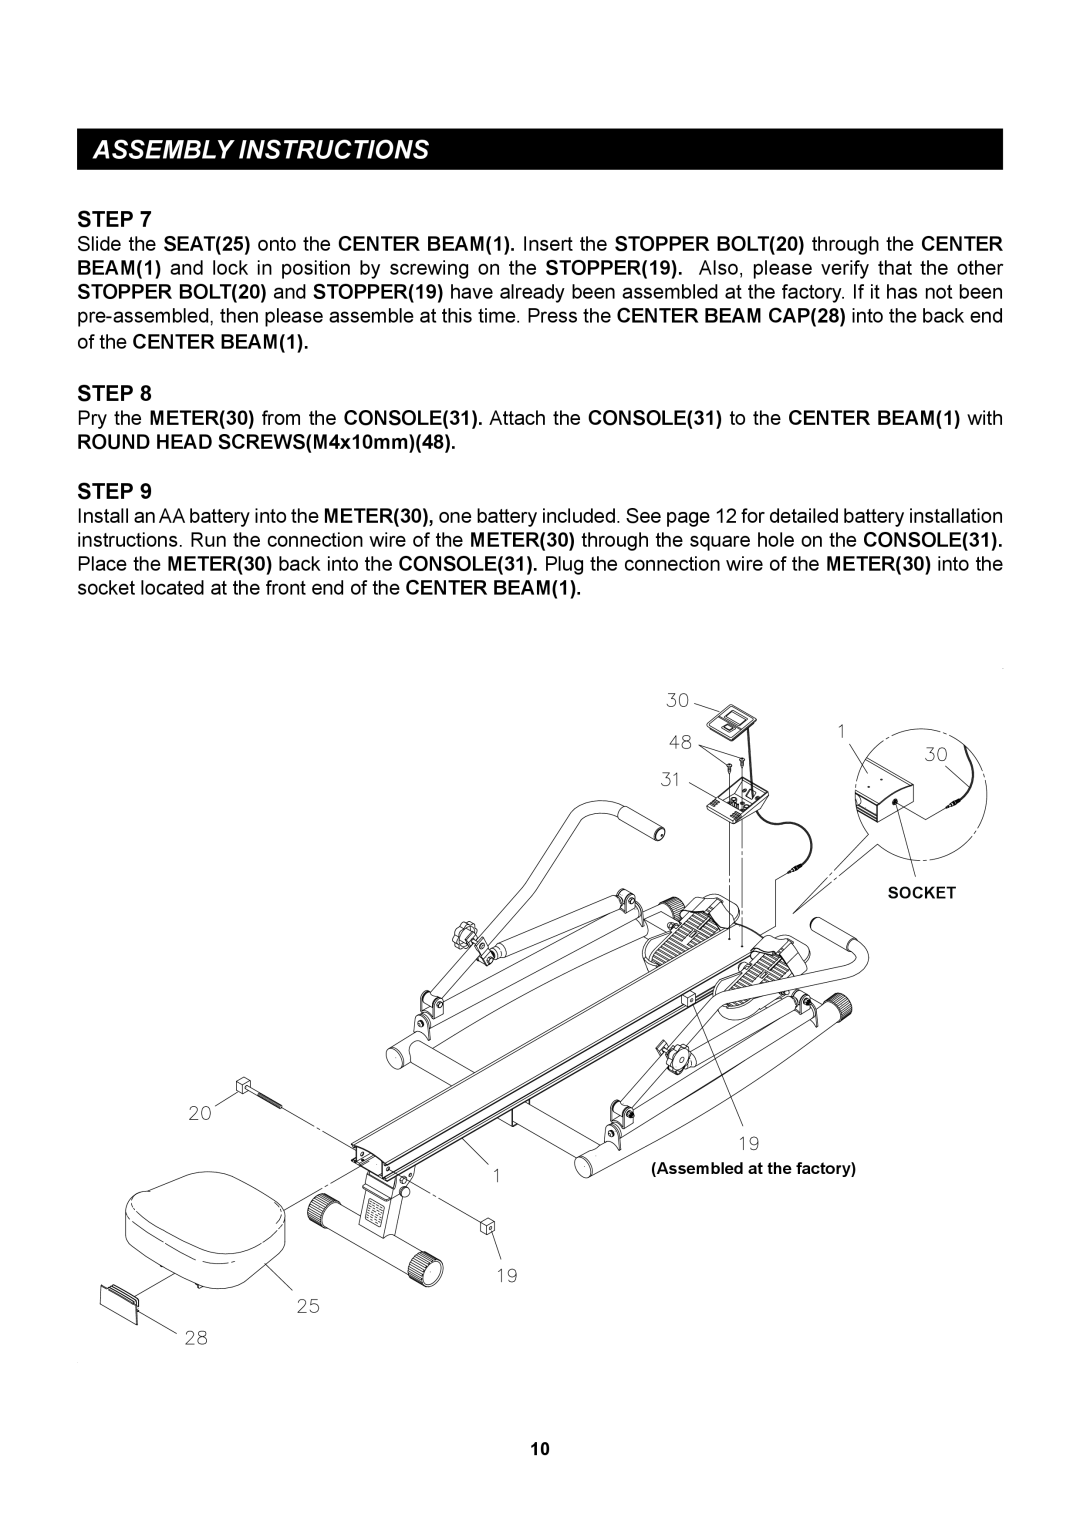 Sears 35-1215B owner manual Assembly Instructions, ROUND HEAD SCREWSM4x10mm48, SOCKET Assembled at the factory 